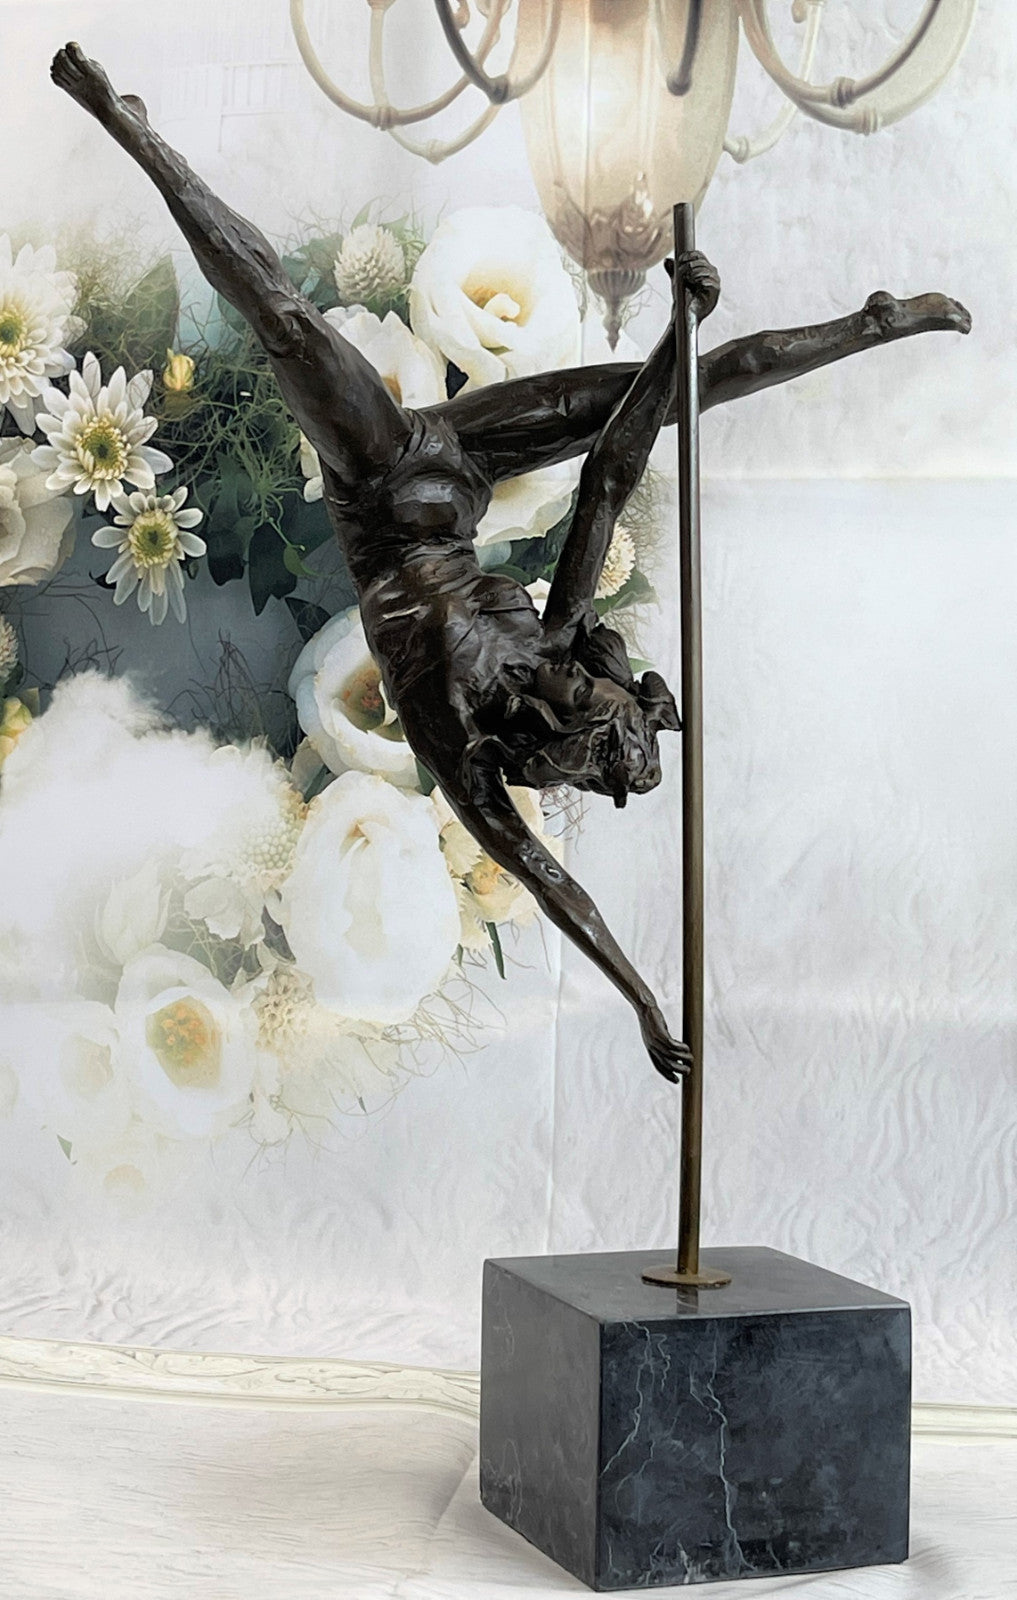 Young Woman Gymnast Hot Cast Gymnastic Home Decor Bronze Very Large Hand Art